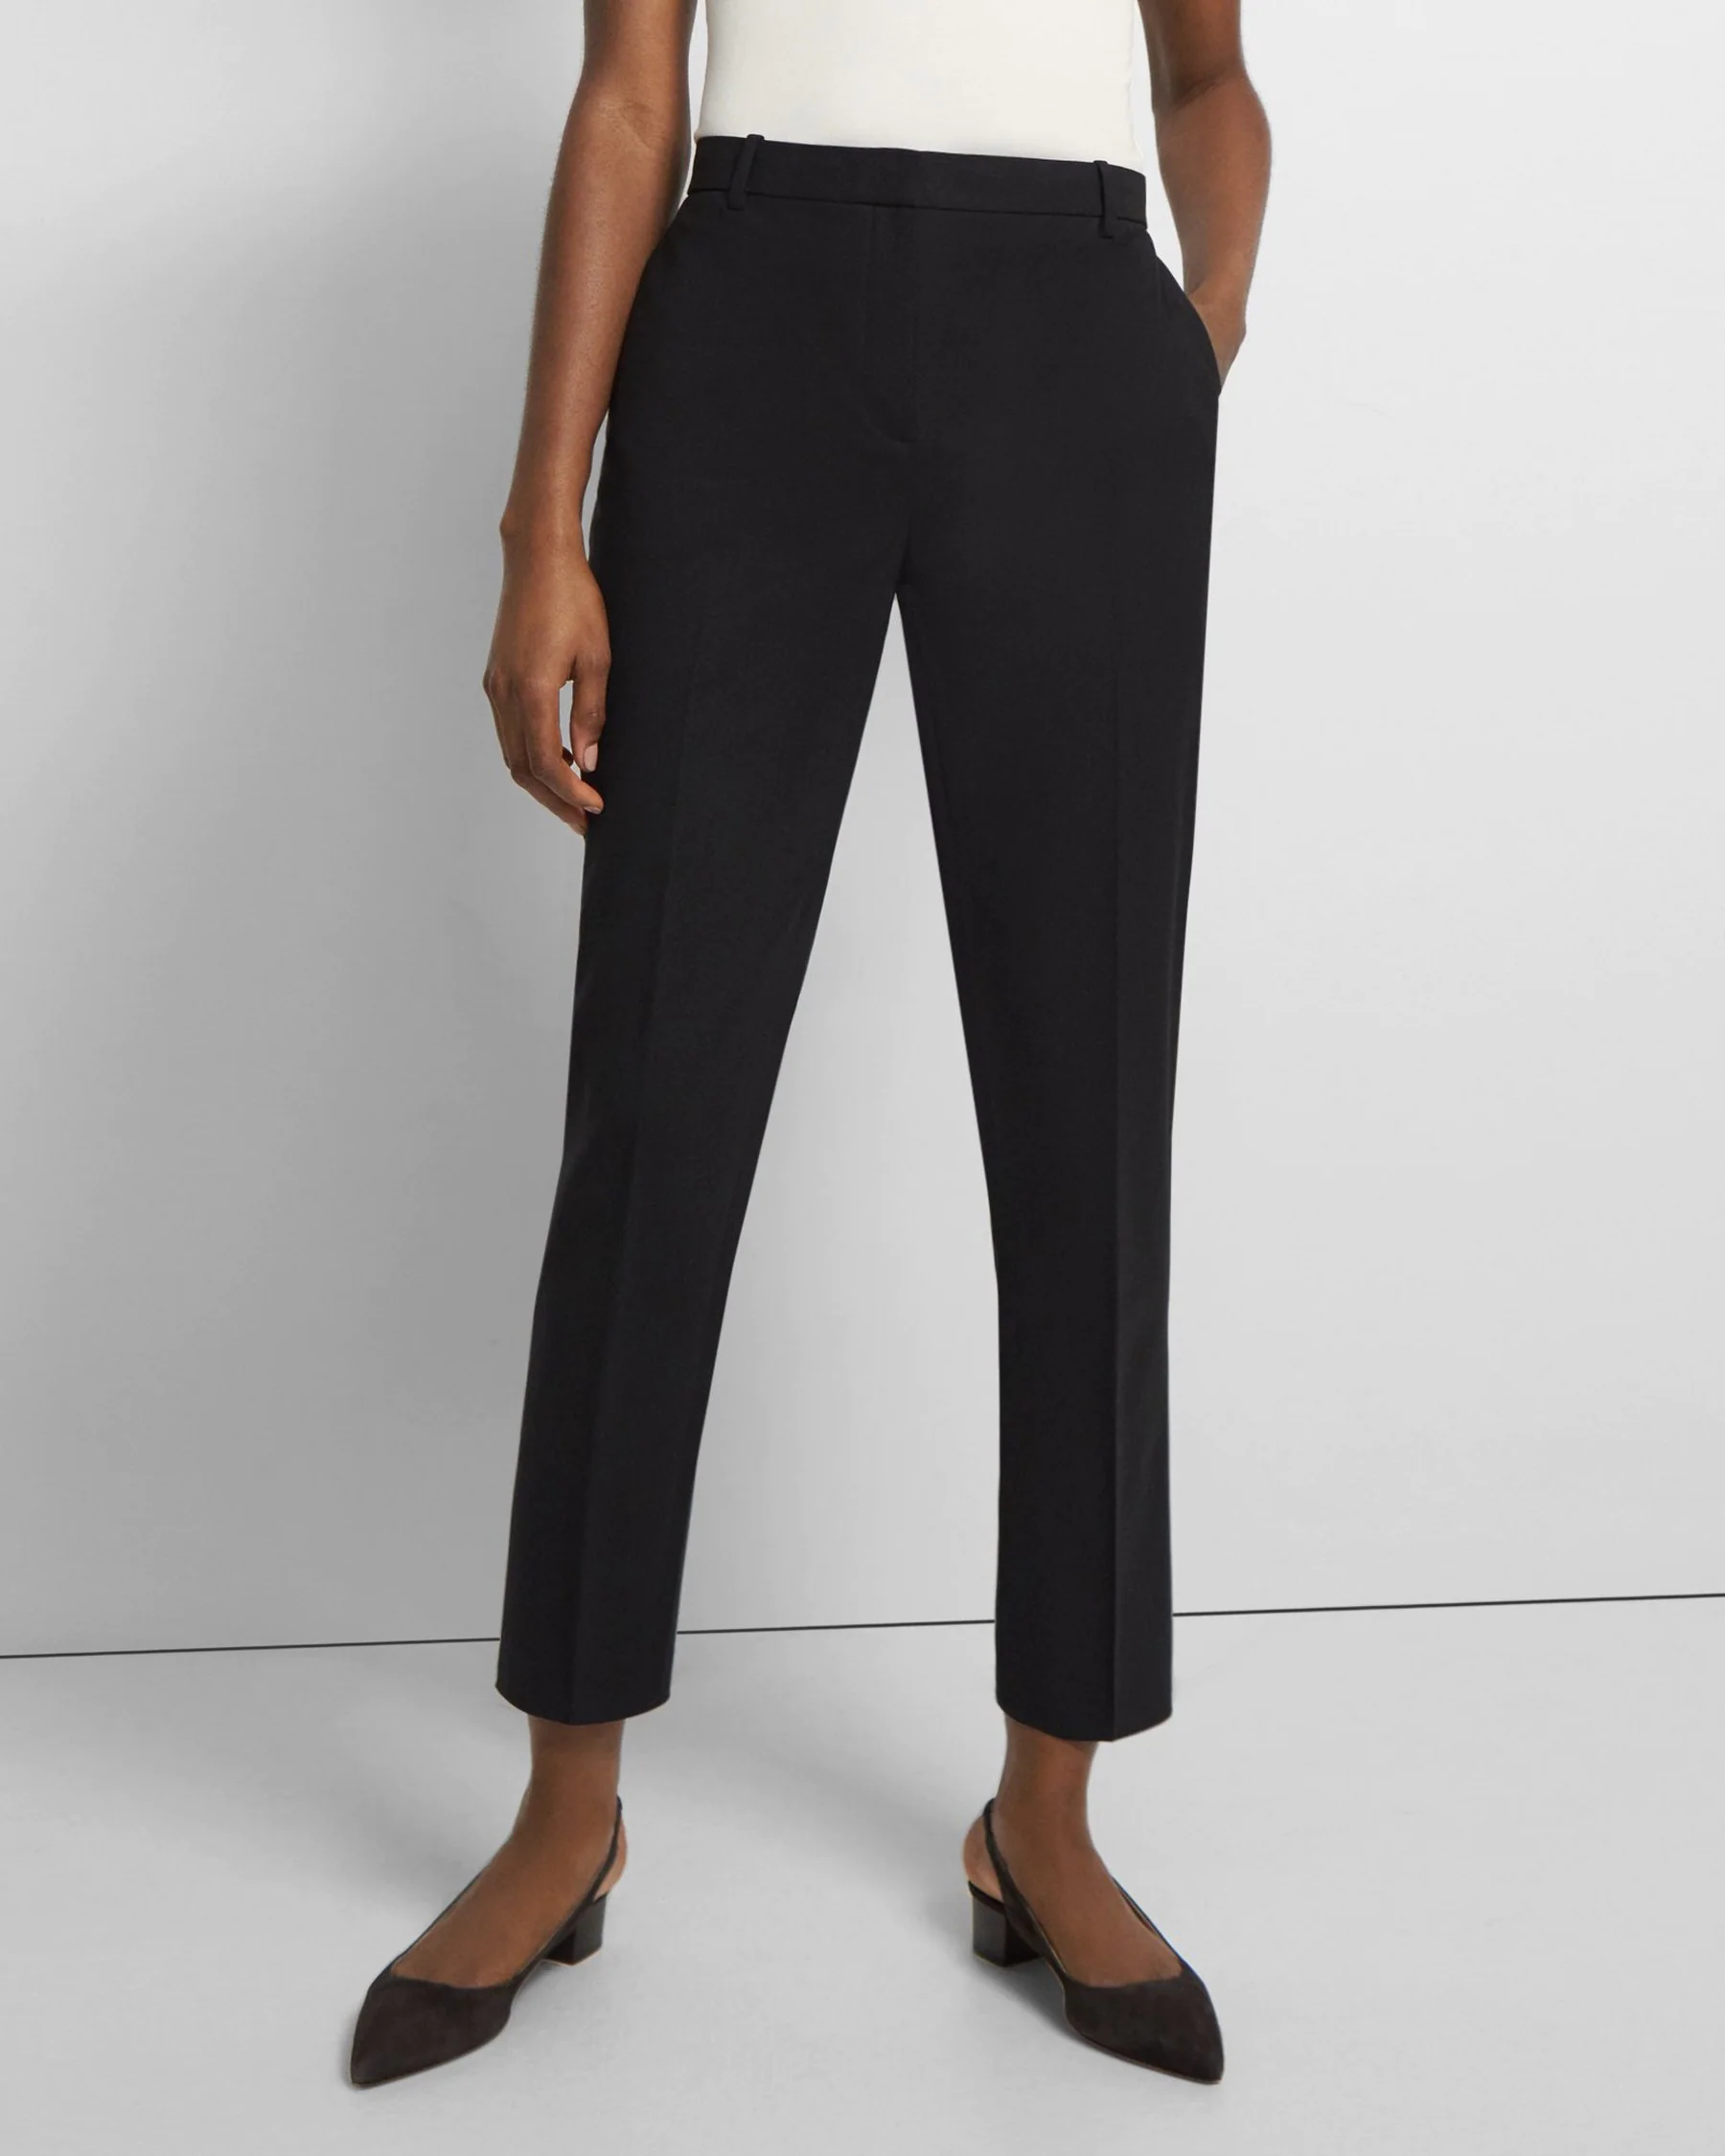 The 9 Very Best Black Work Pants for Women  Work pants women, Pants for  women, Cropped pants